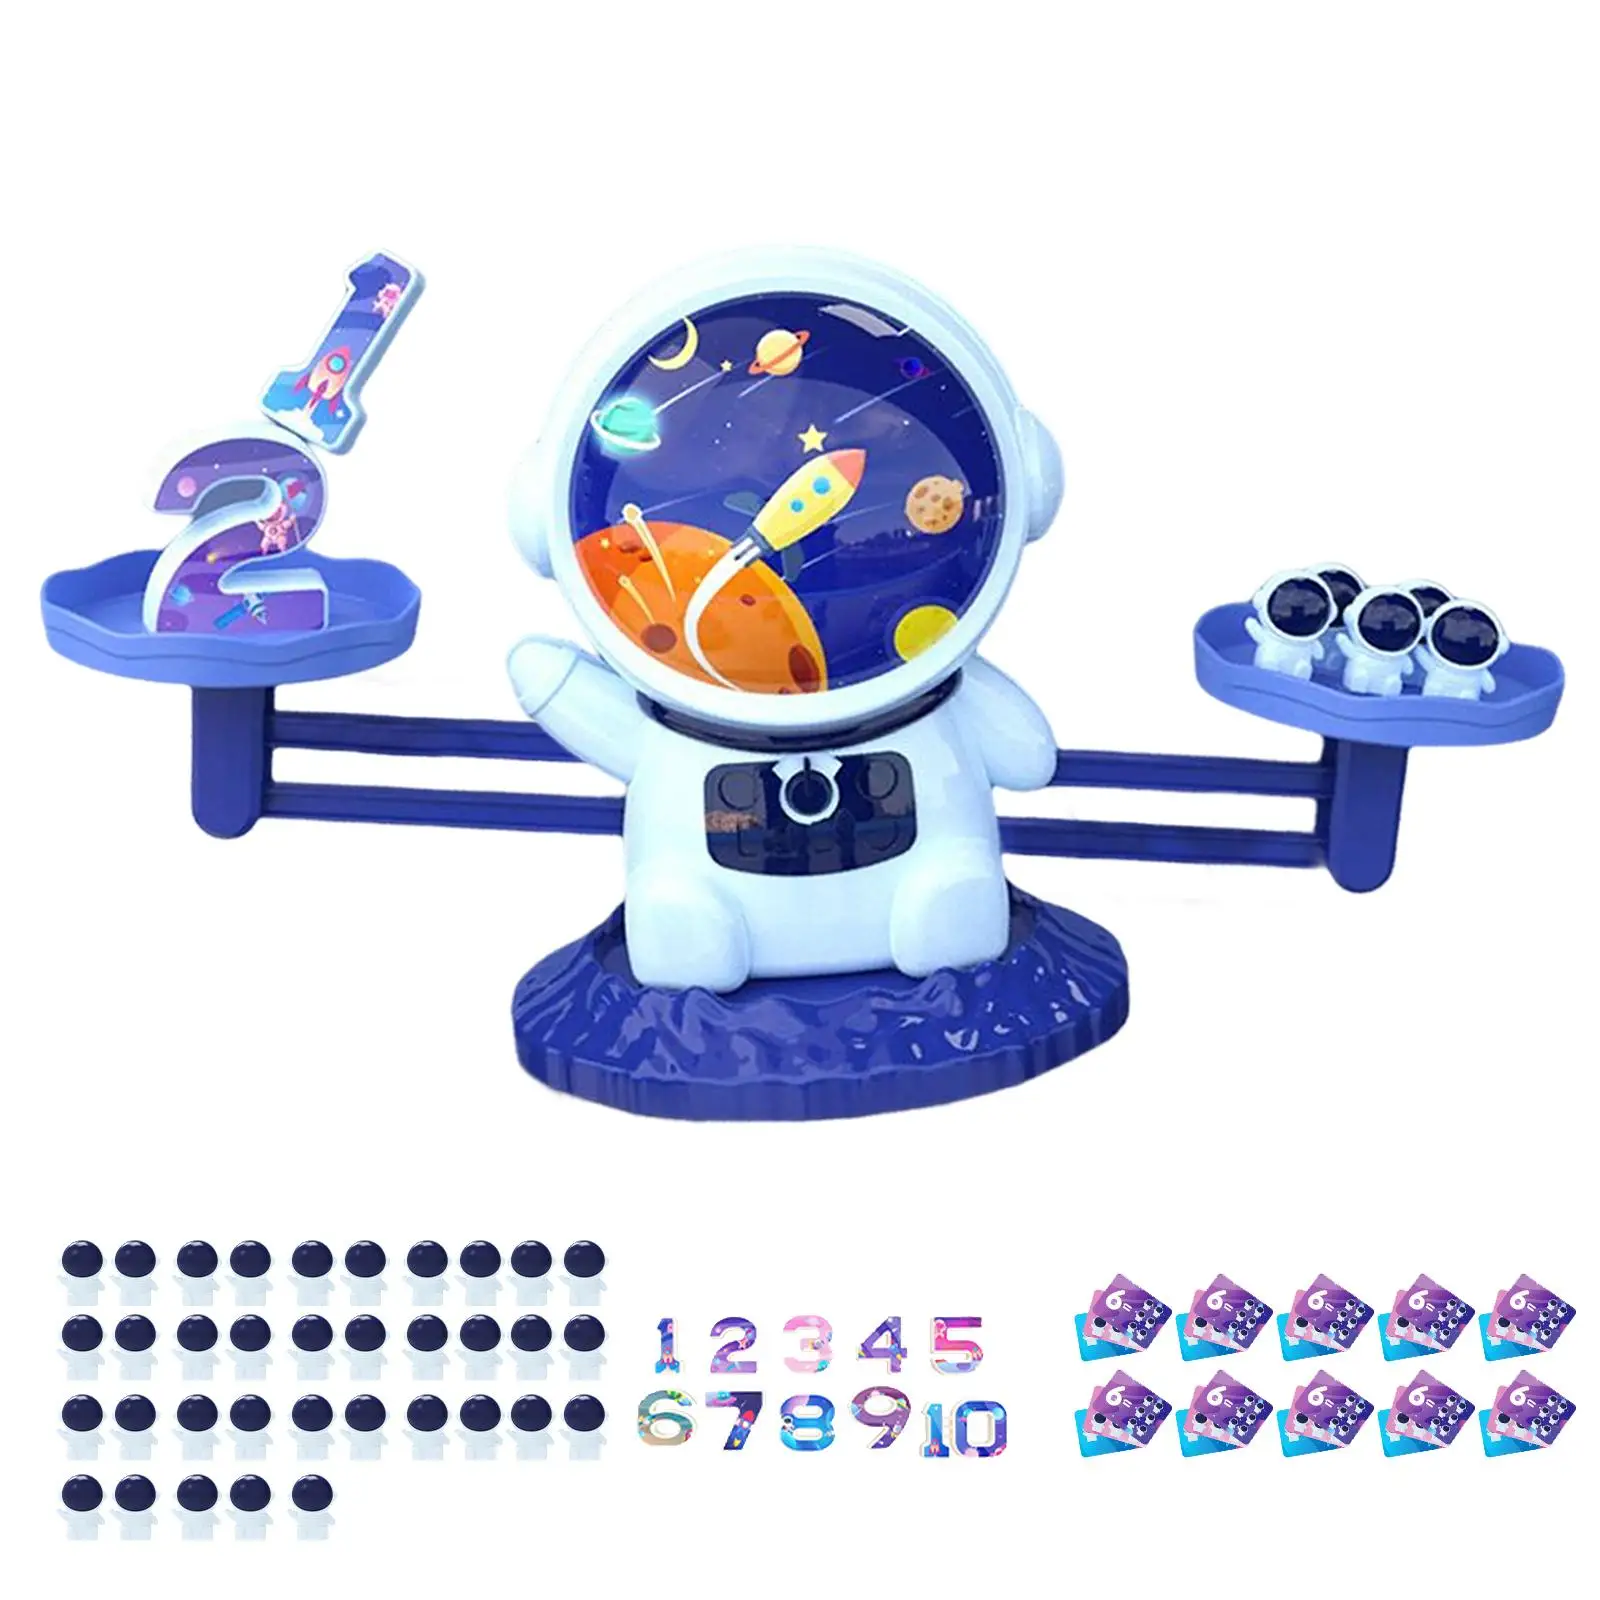 Balance Math Game Learning Activities Educational Toys Preschool Balance Scale Number Board Game for boys Kids